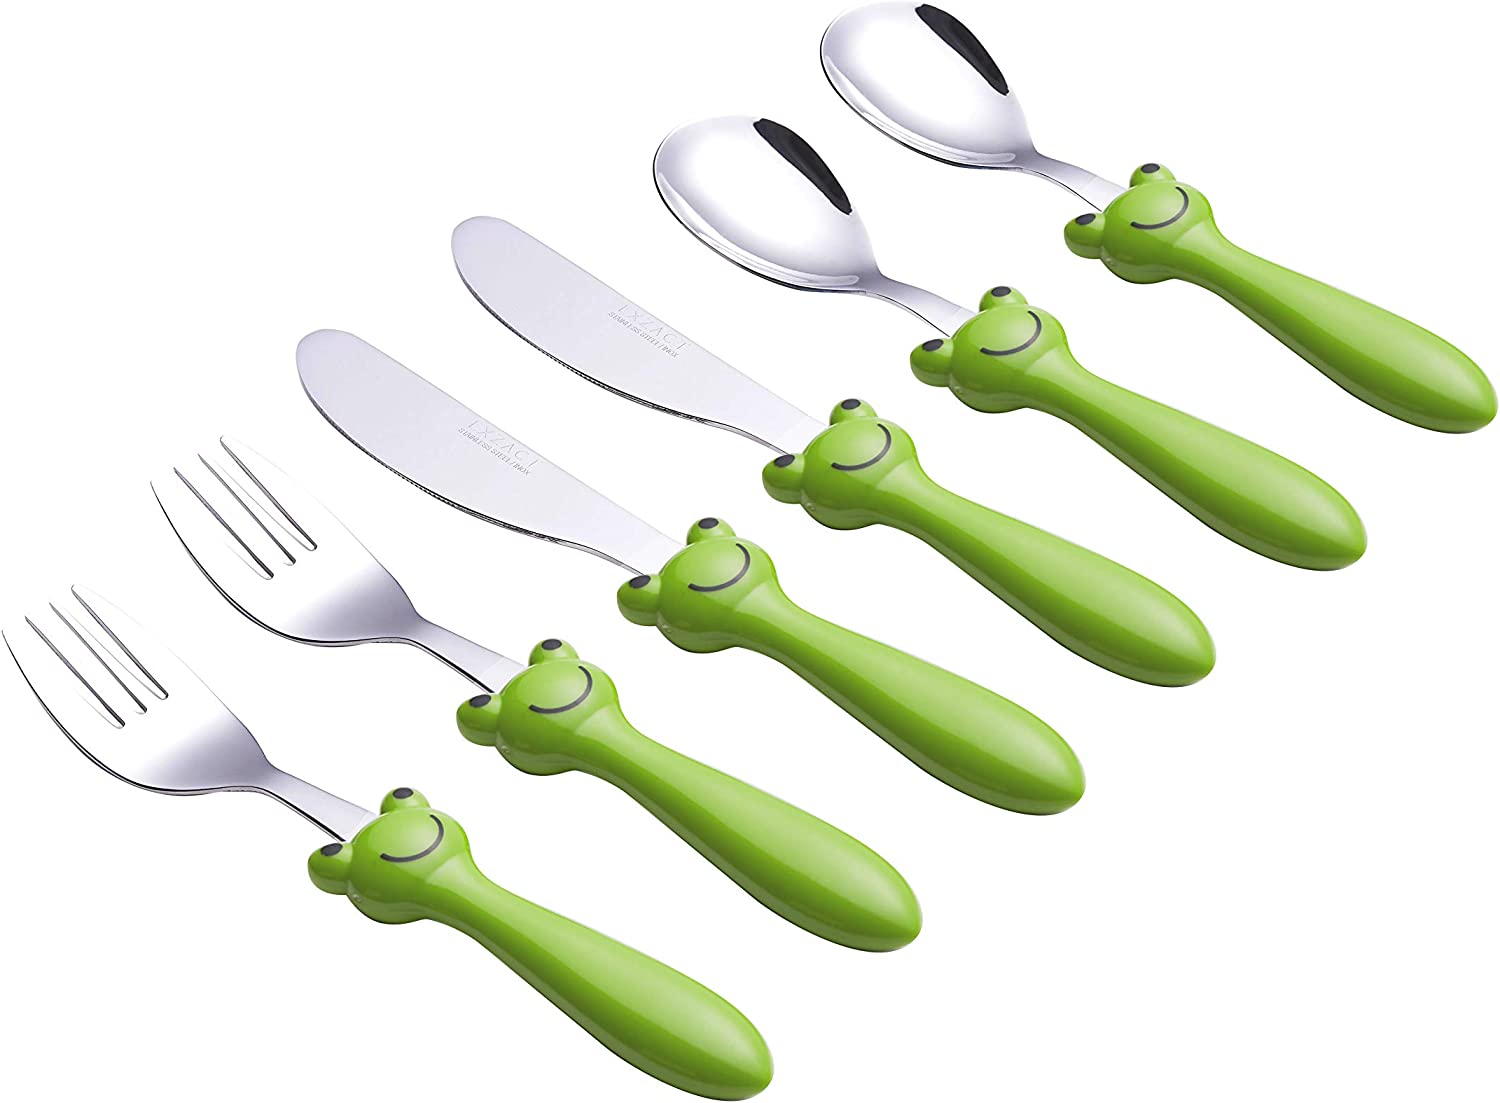 Exzact children's cutlery set 6 pieces made of stainless steel/dishwasher-safe children's cutlery set